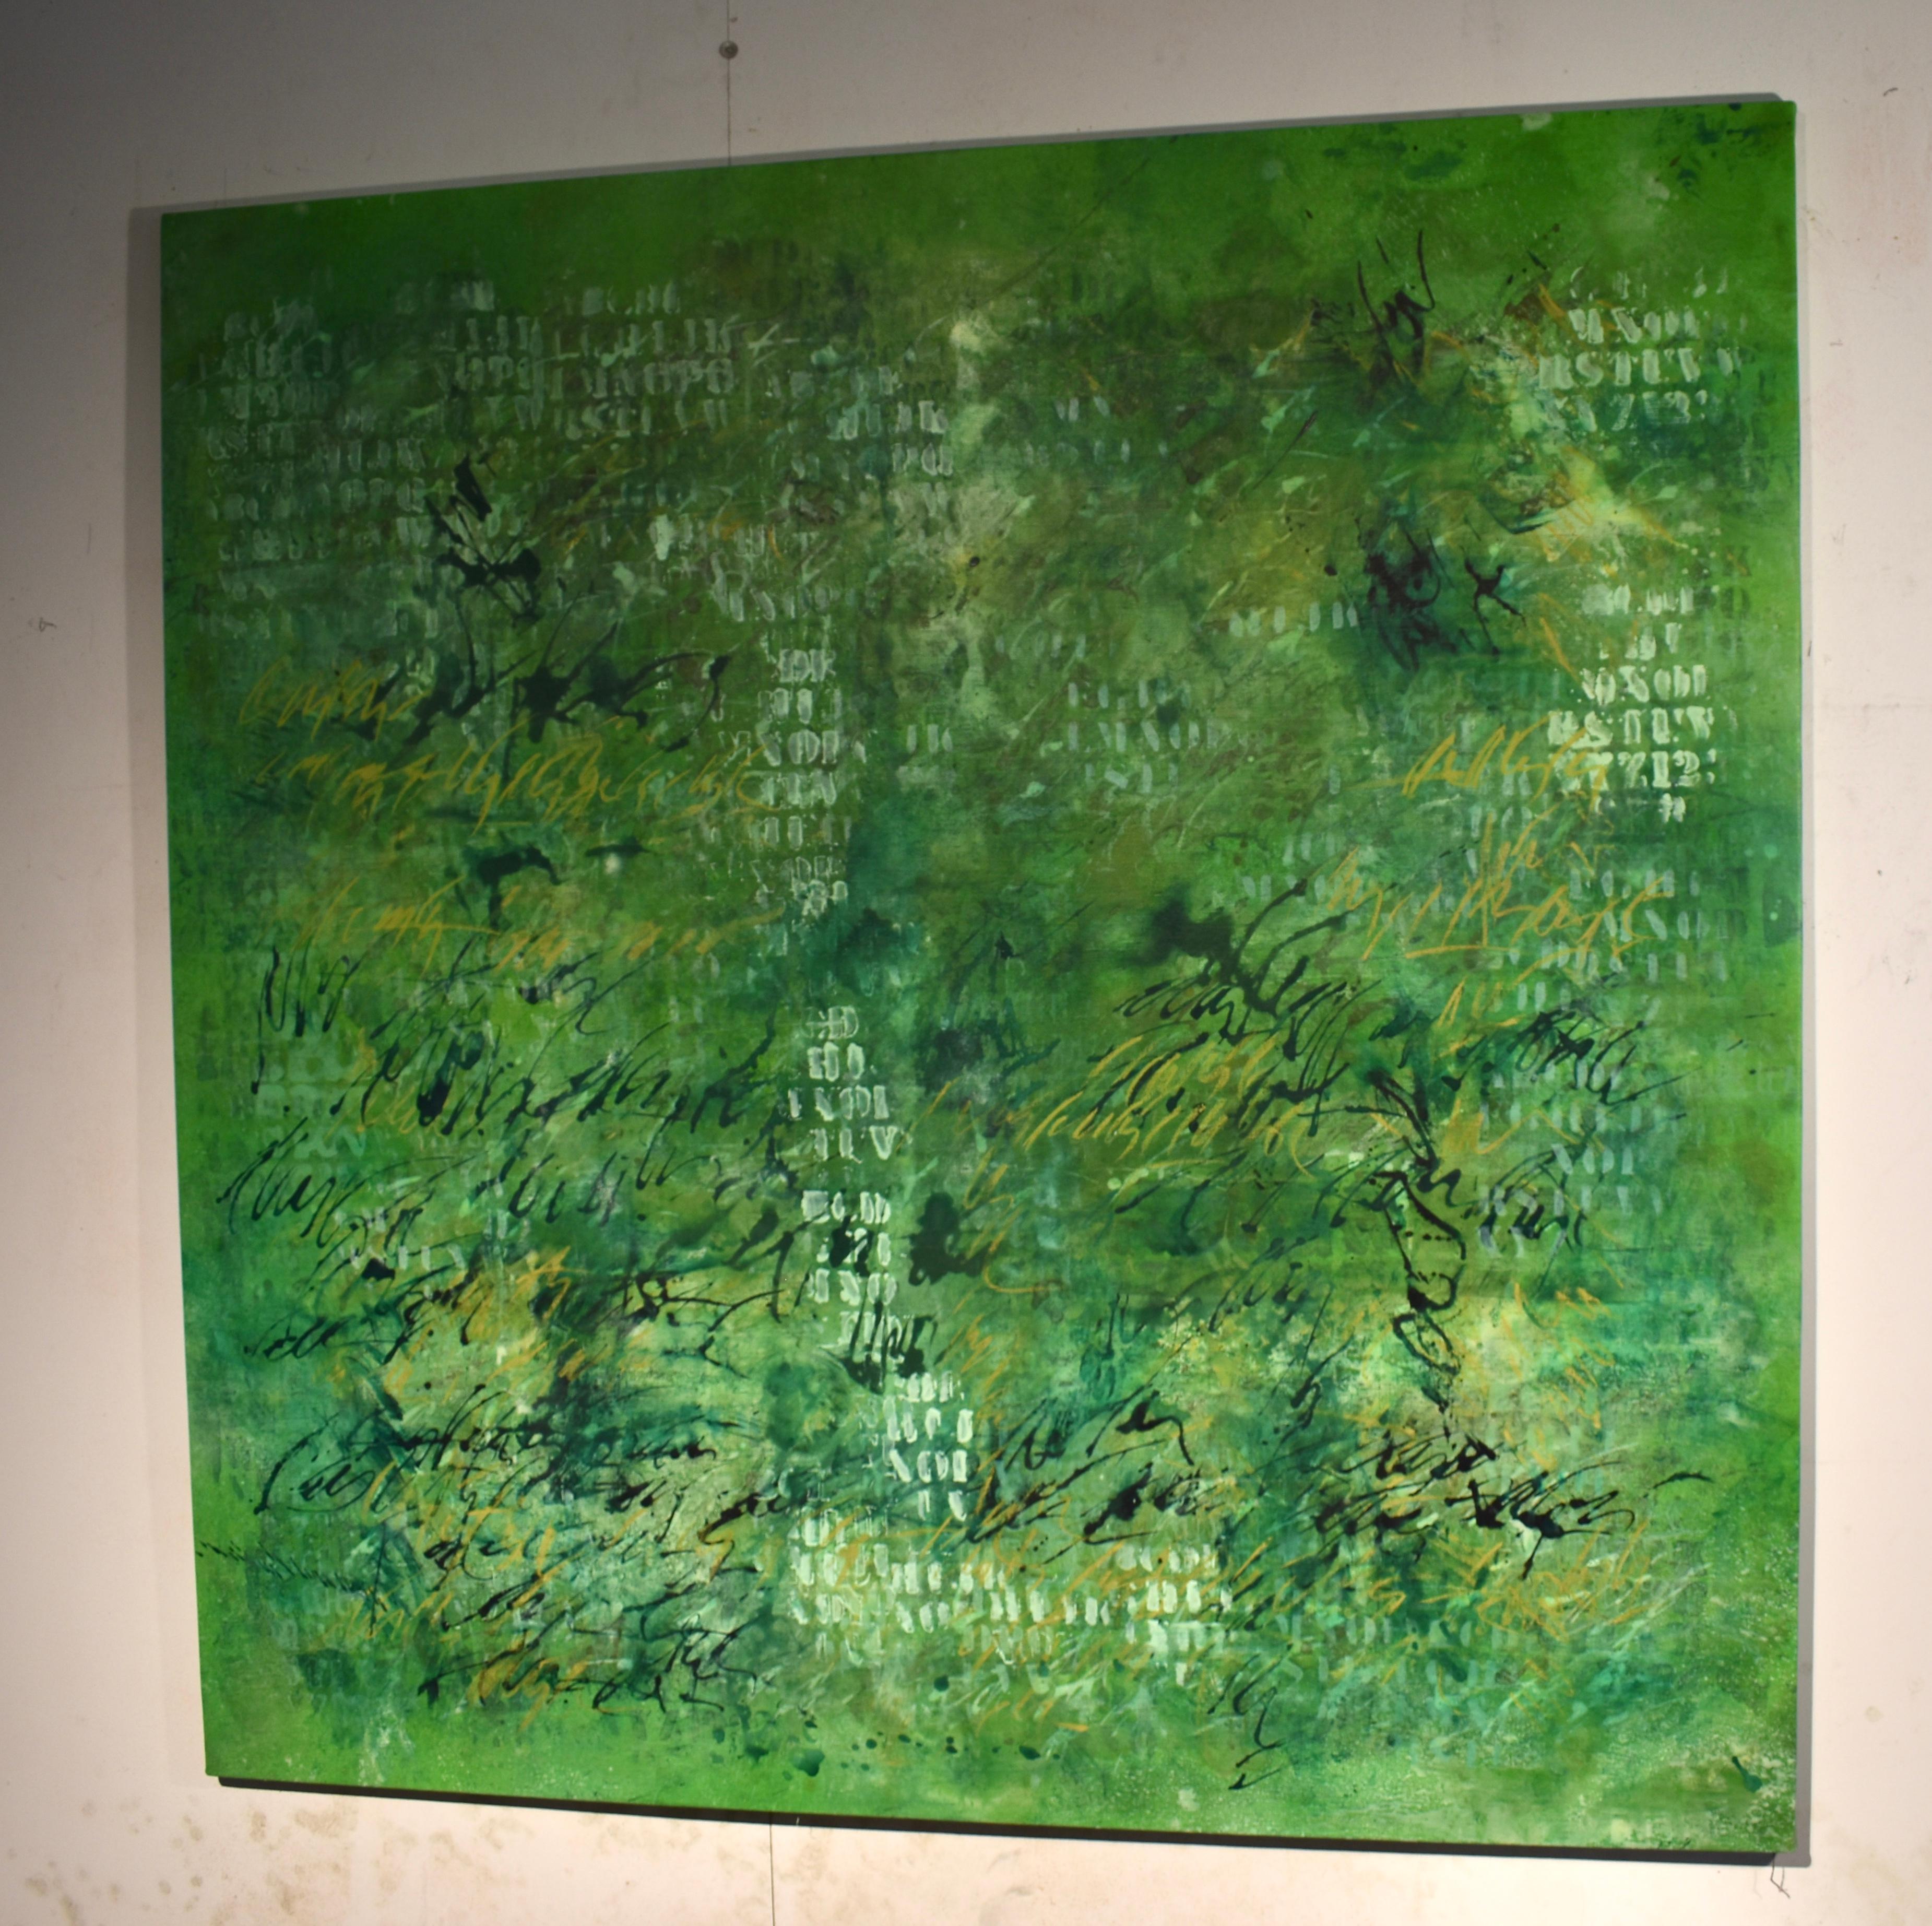 Roberto RENIS, Mixed Media ( not digital ) oil and acrylic on Canvas, Abstract Contemporary Latinamerican Art.

The Writing:

They are fragments of stories that appear in the interstices of words (between words) during Zen meditation. They also have